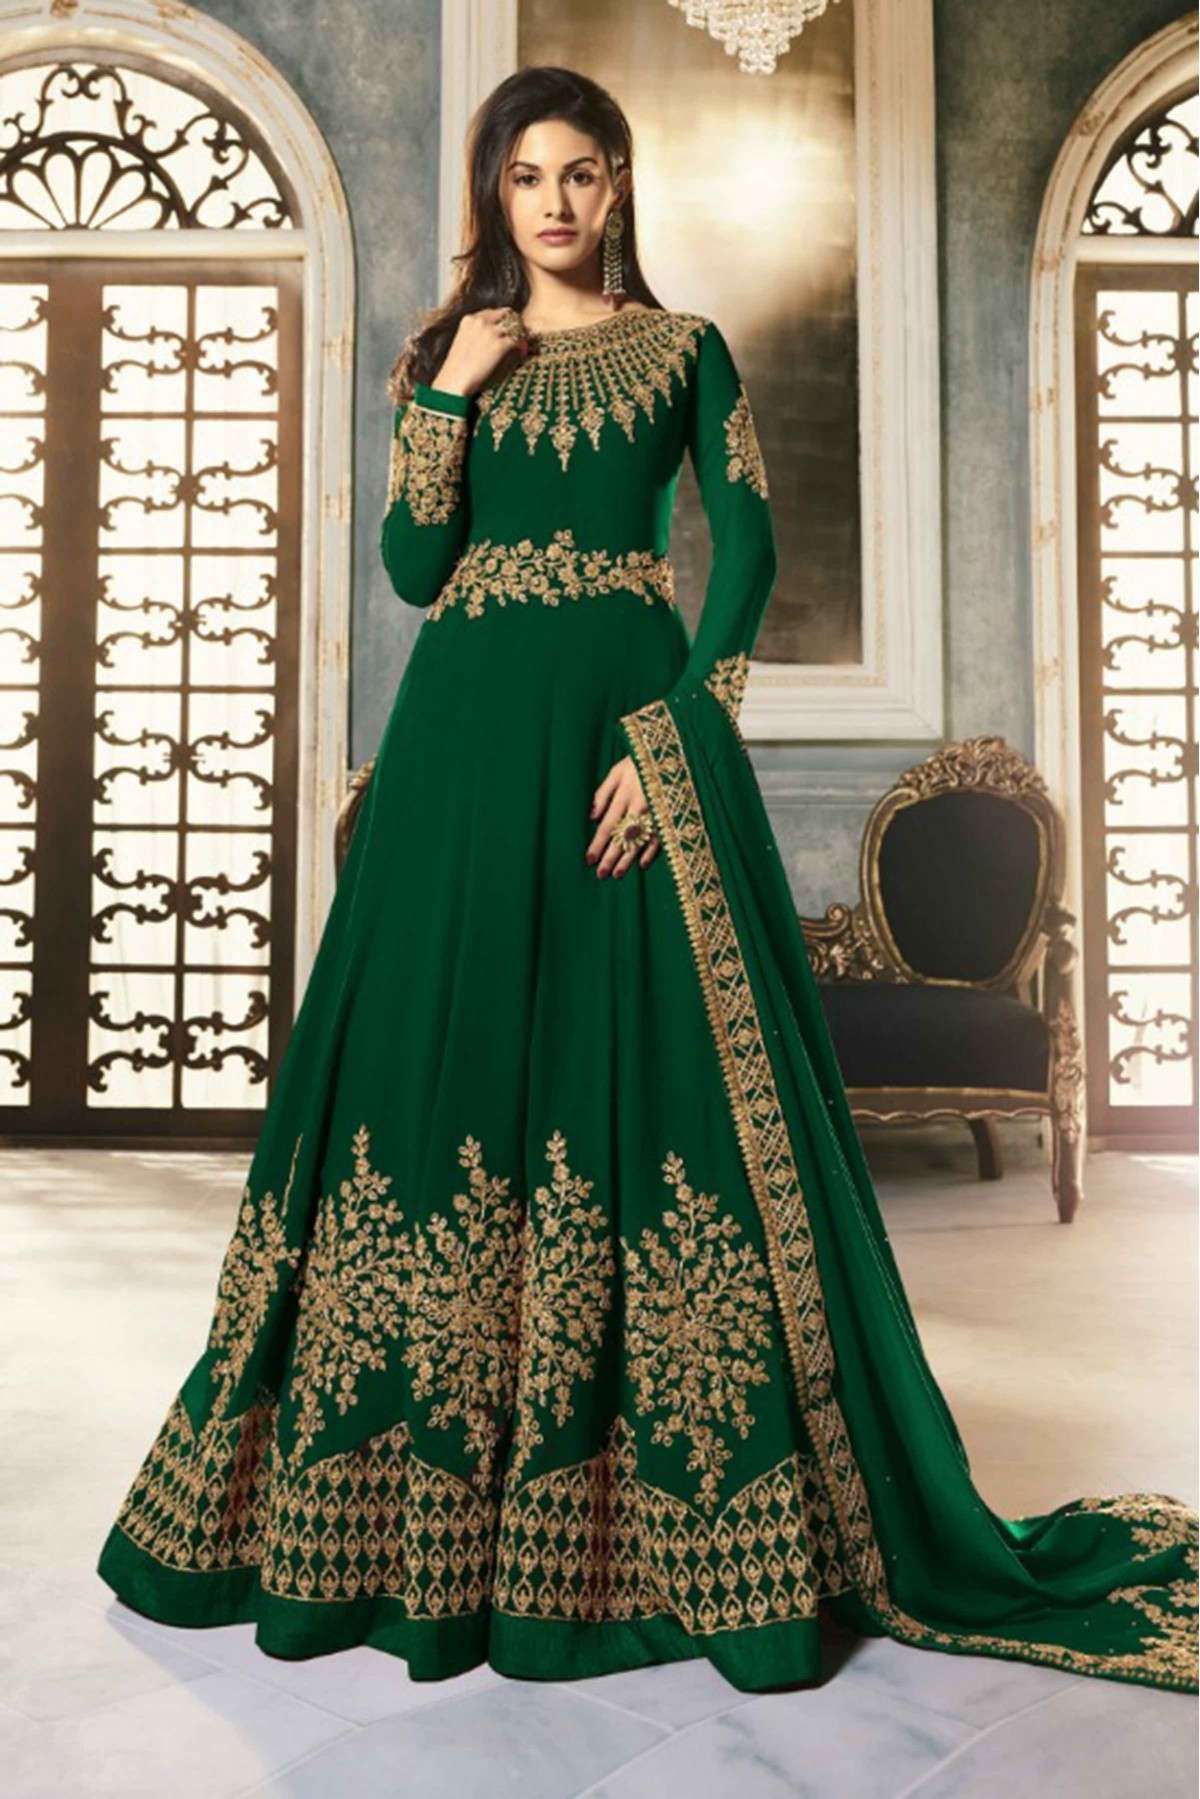 Georgette Embroidery Anarkali Suit In Green Colour - SM1775480